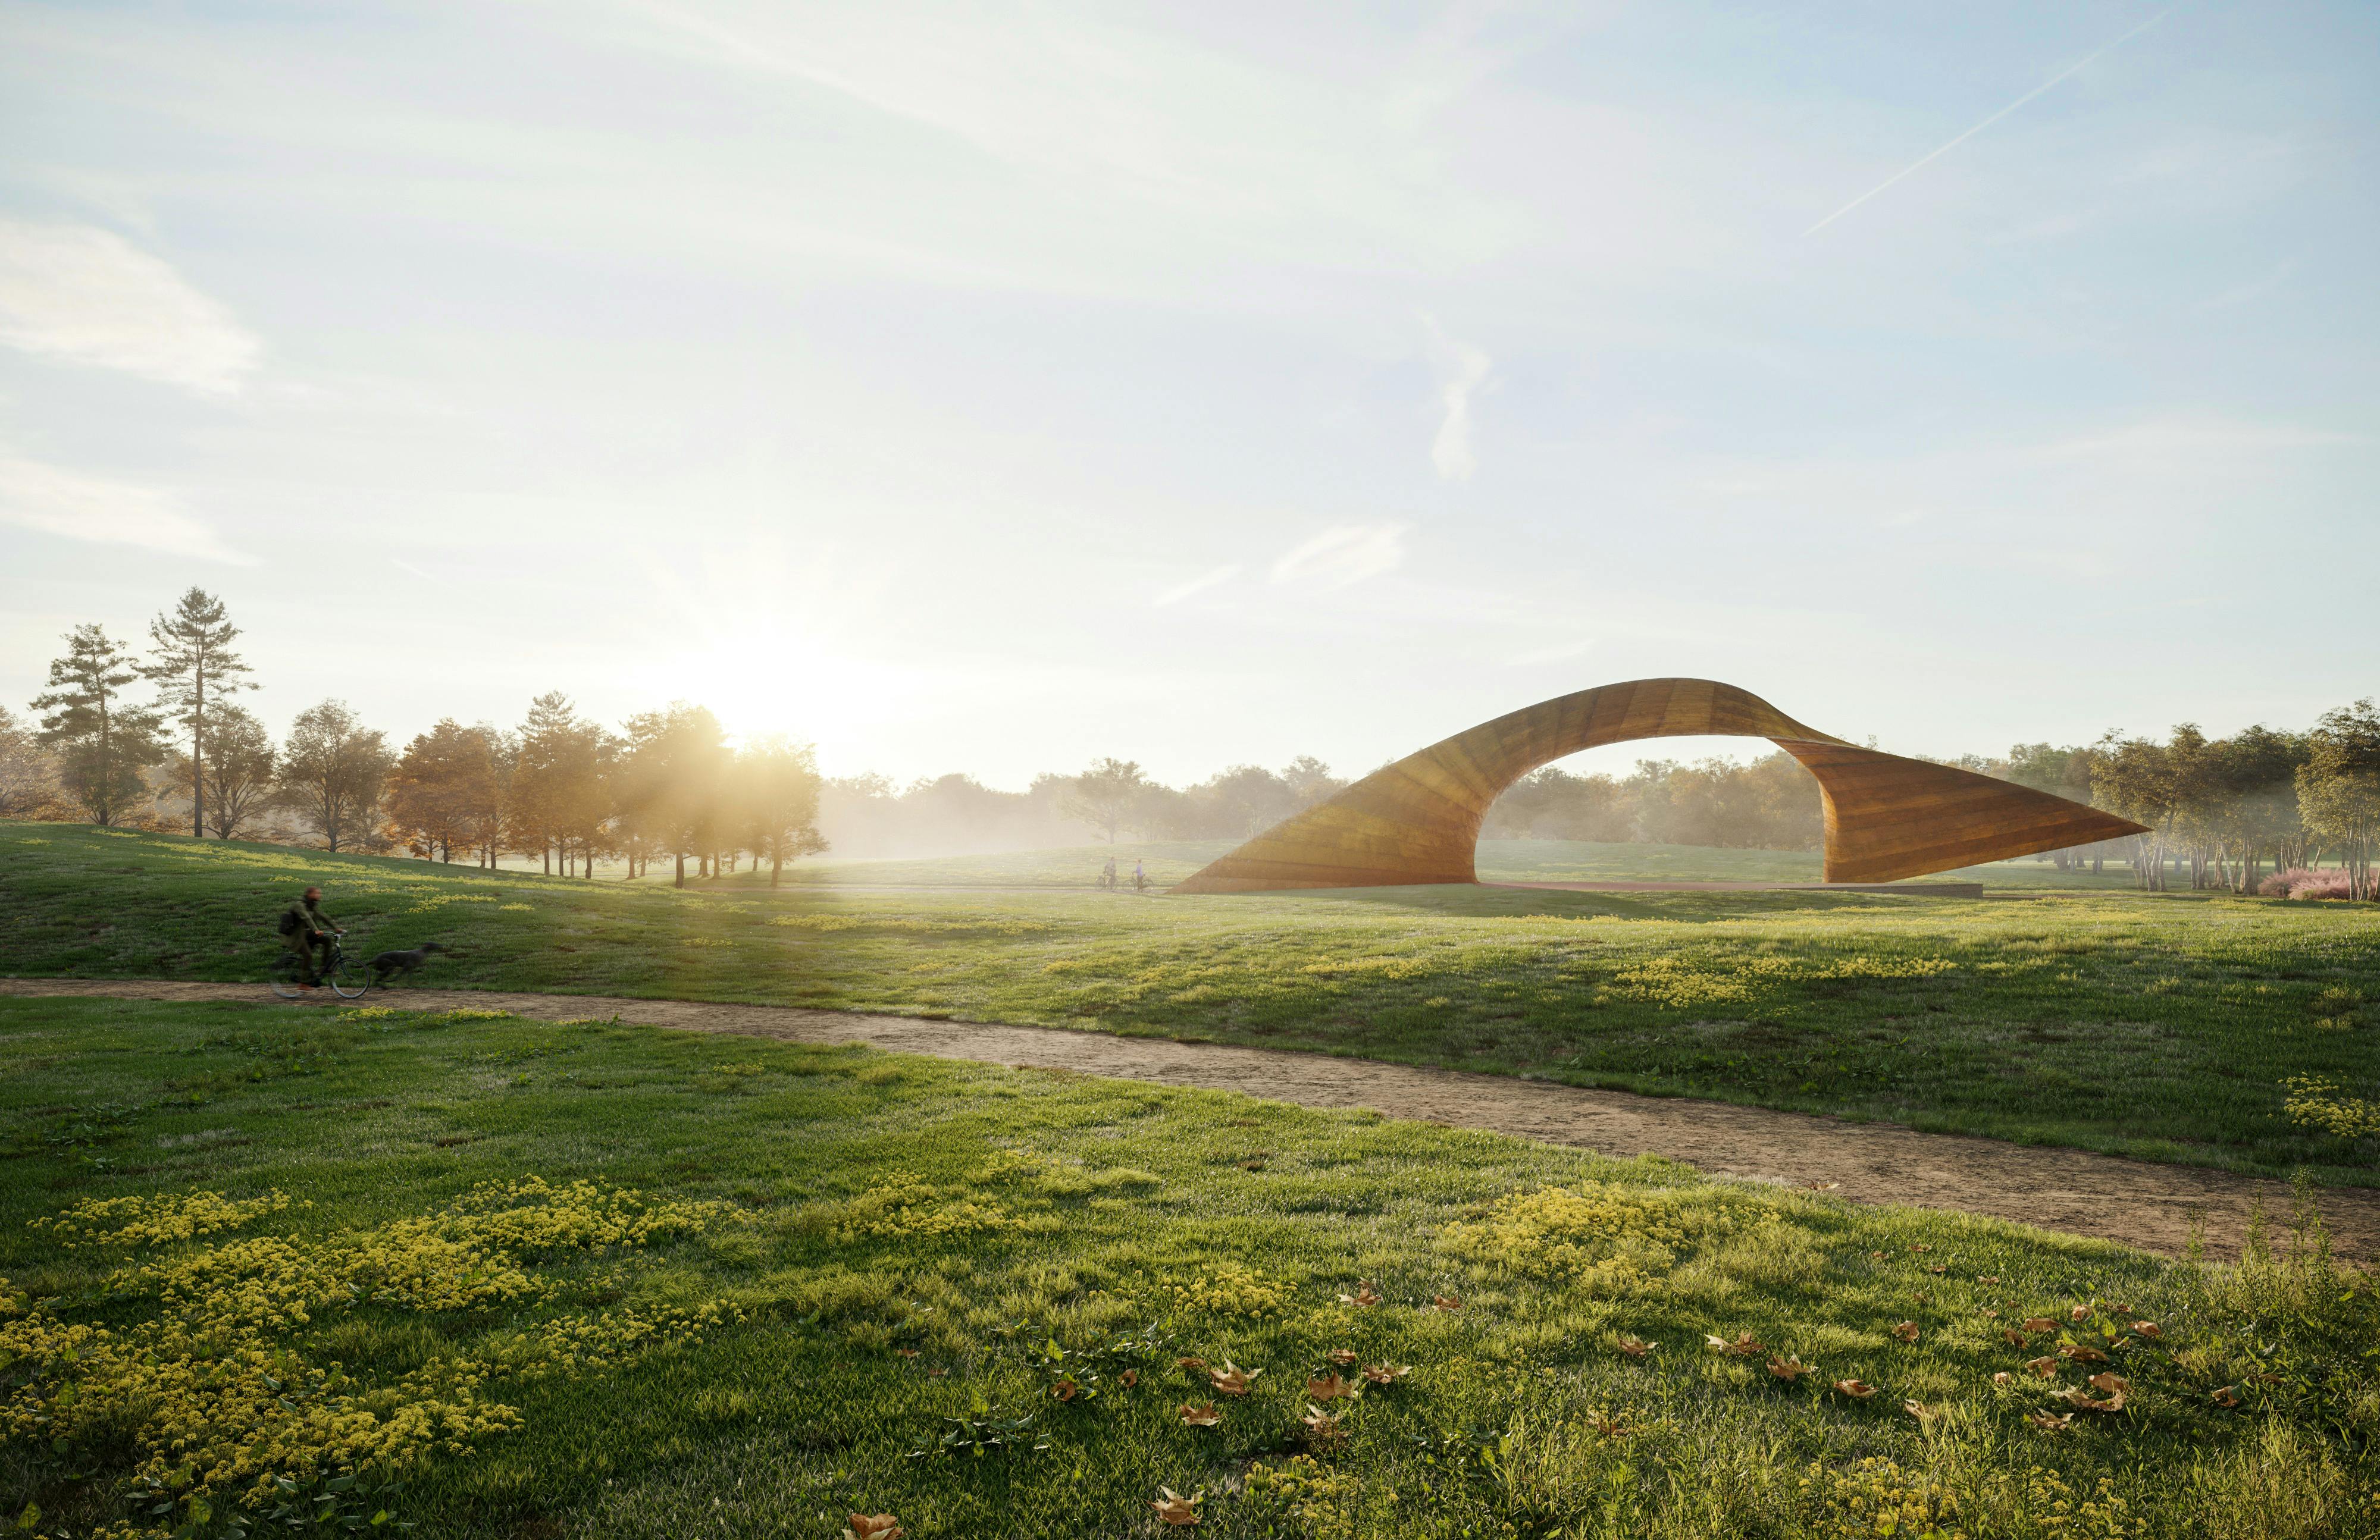 Sunrise perspective rendering of performance pavilion nestled in lush green field and under open sky with swooping path cutting through grass field.